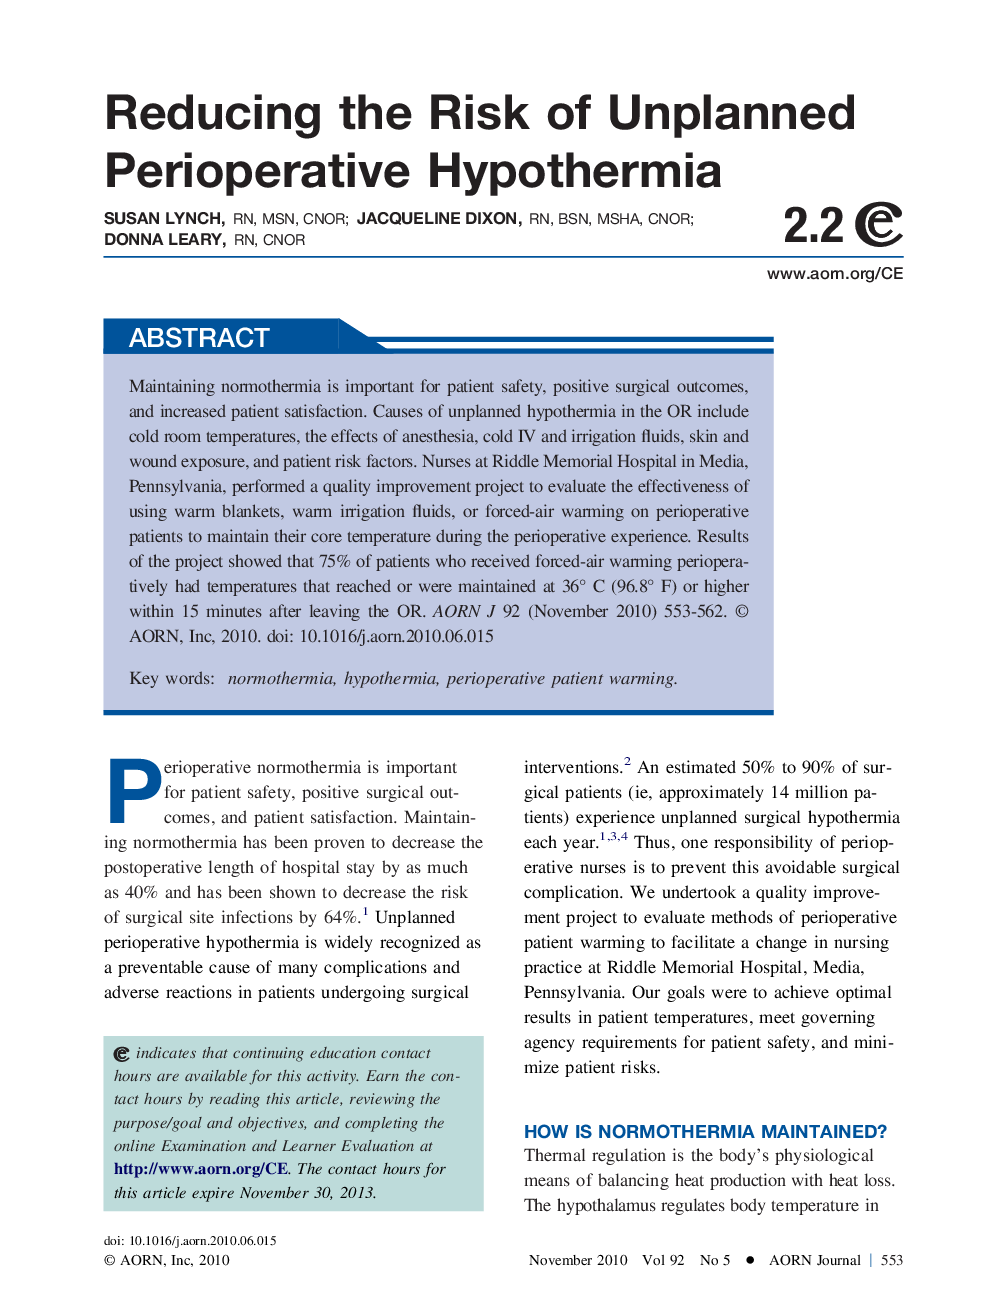 Reducing the Risk of Unplanned Perioperative Hypothermia